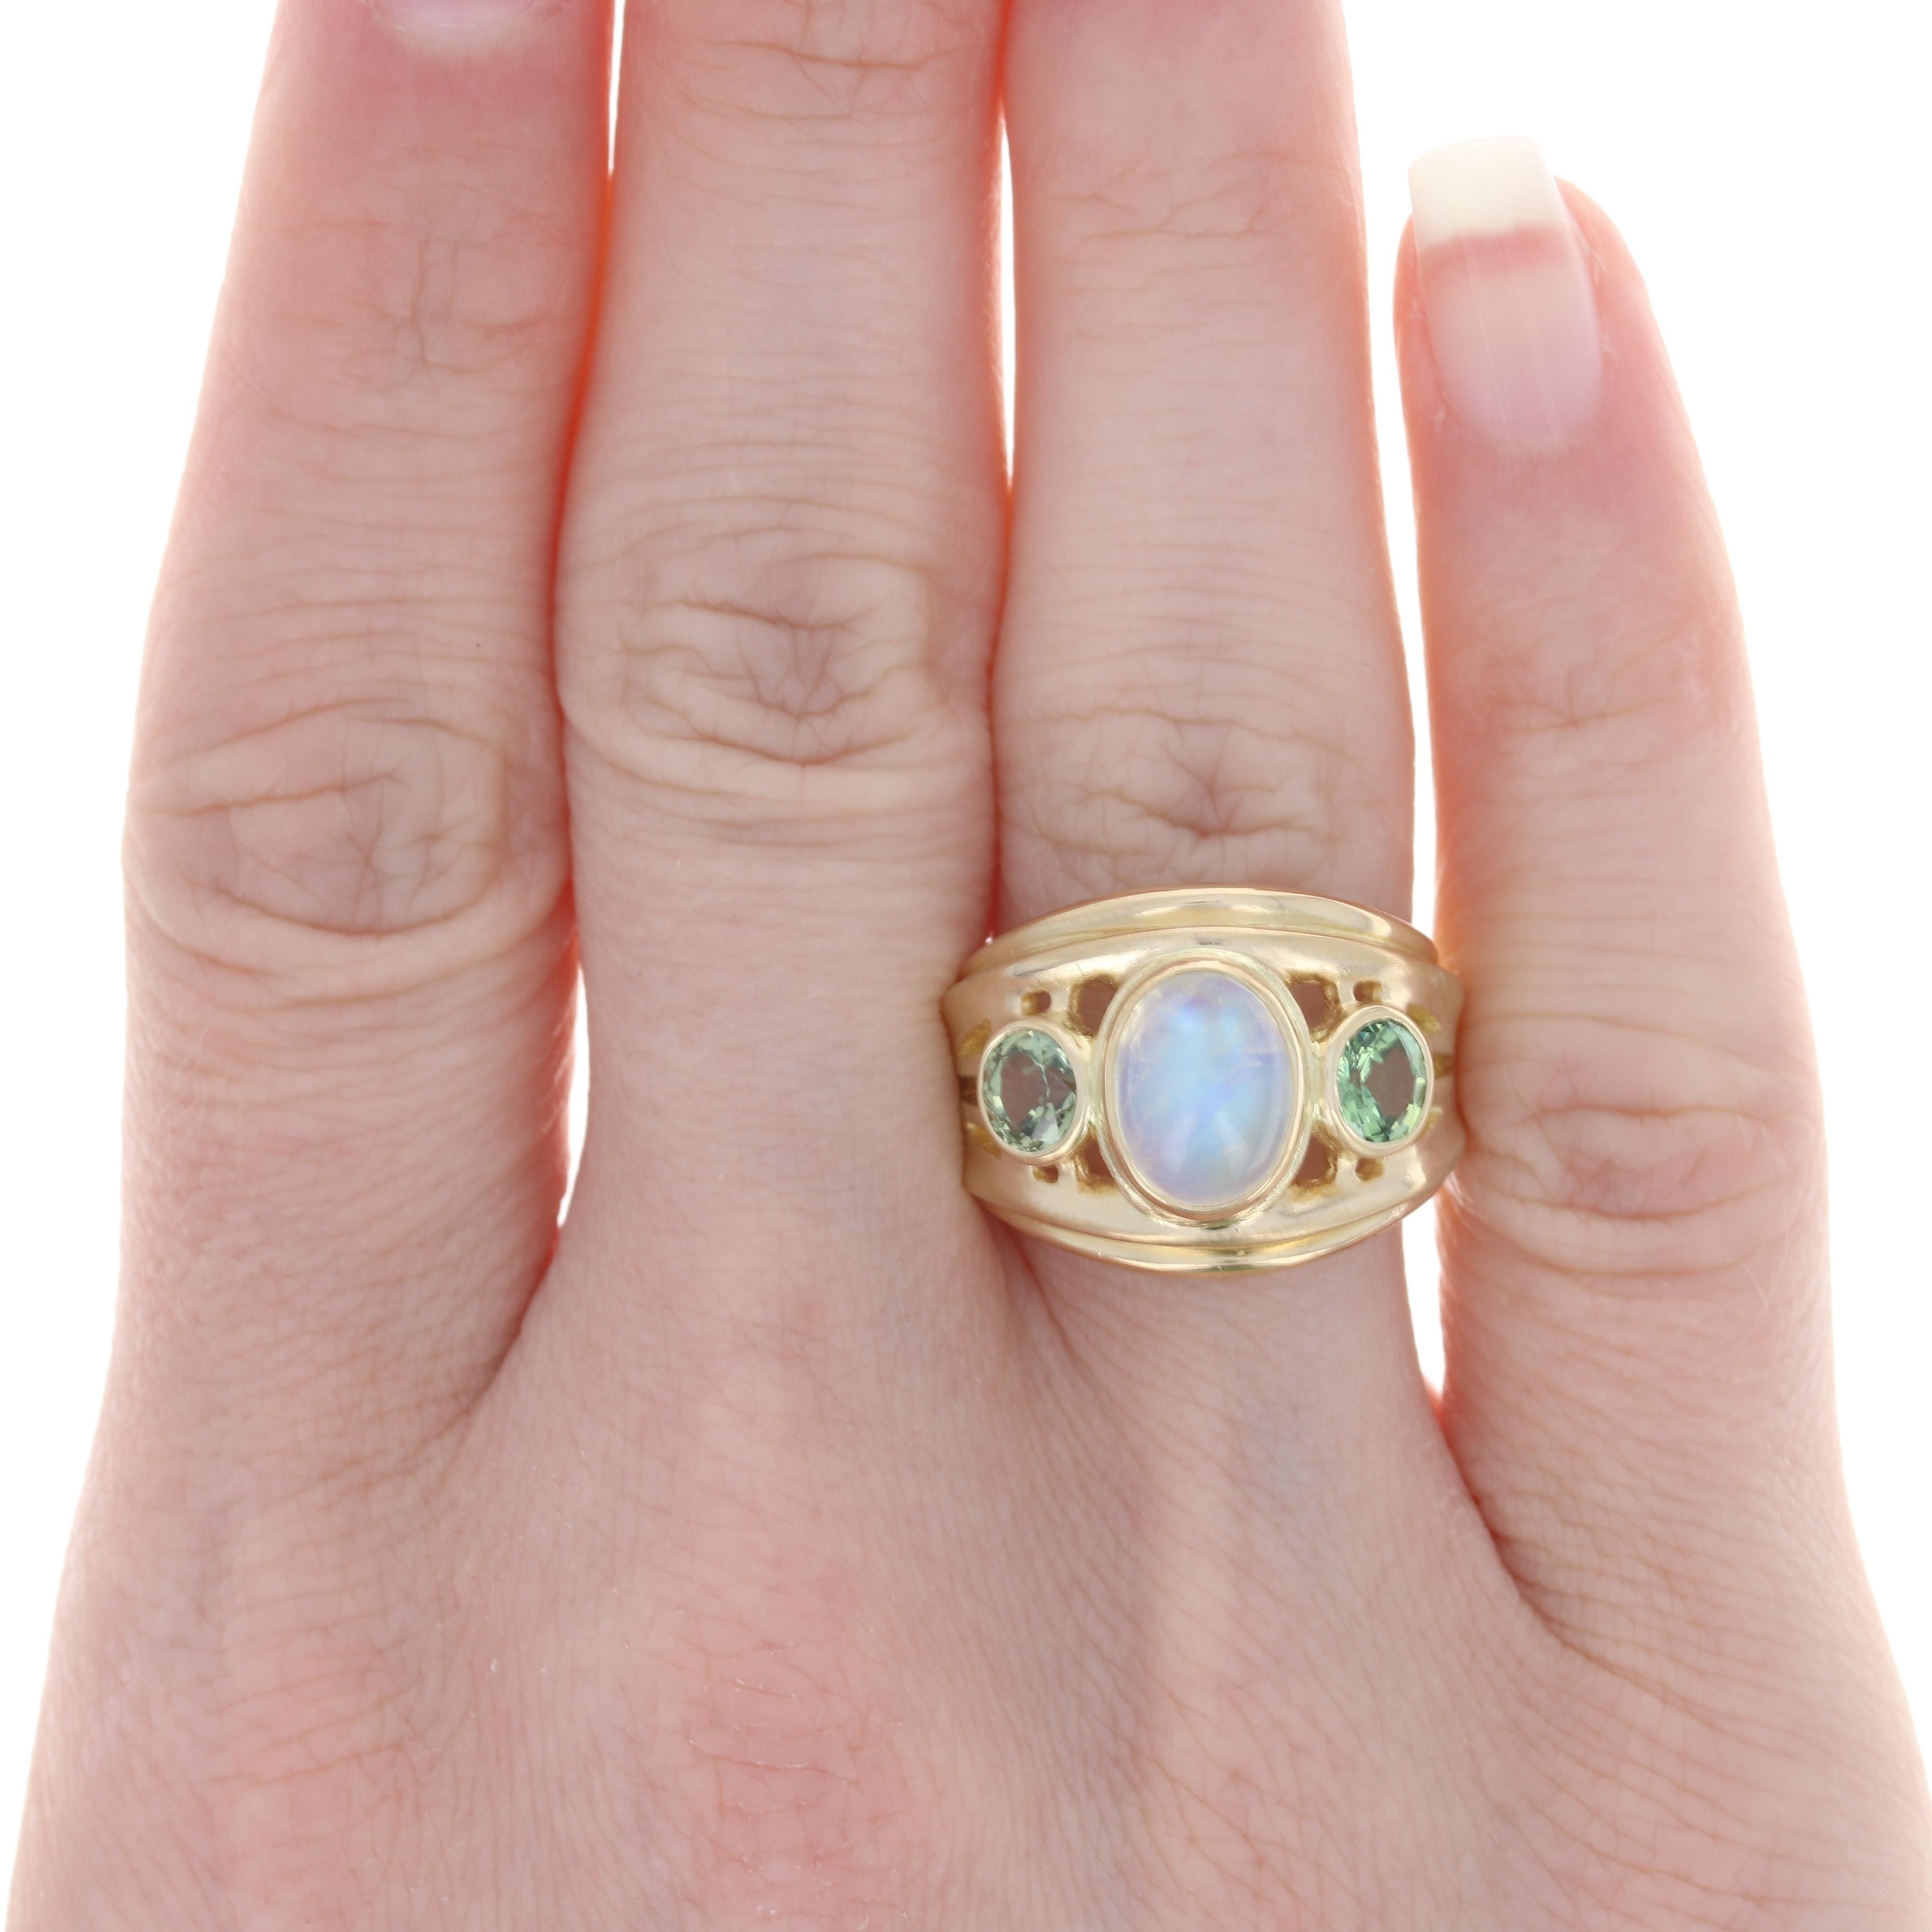 Size: 8
 
 Metal Content: 18k Yellow Gold 
 
 Stone Information: 
 Genuine Moonstone
 Carat: 2.40ct
 Cut: Cabochon
 
 Genuine Sapphires
 Treatment: Heating
 Carats: 1.20ctw
 Cut: Round
 Color: Green
 
 Total Carats: 3.60ctw
 
 Style: Solitaire with